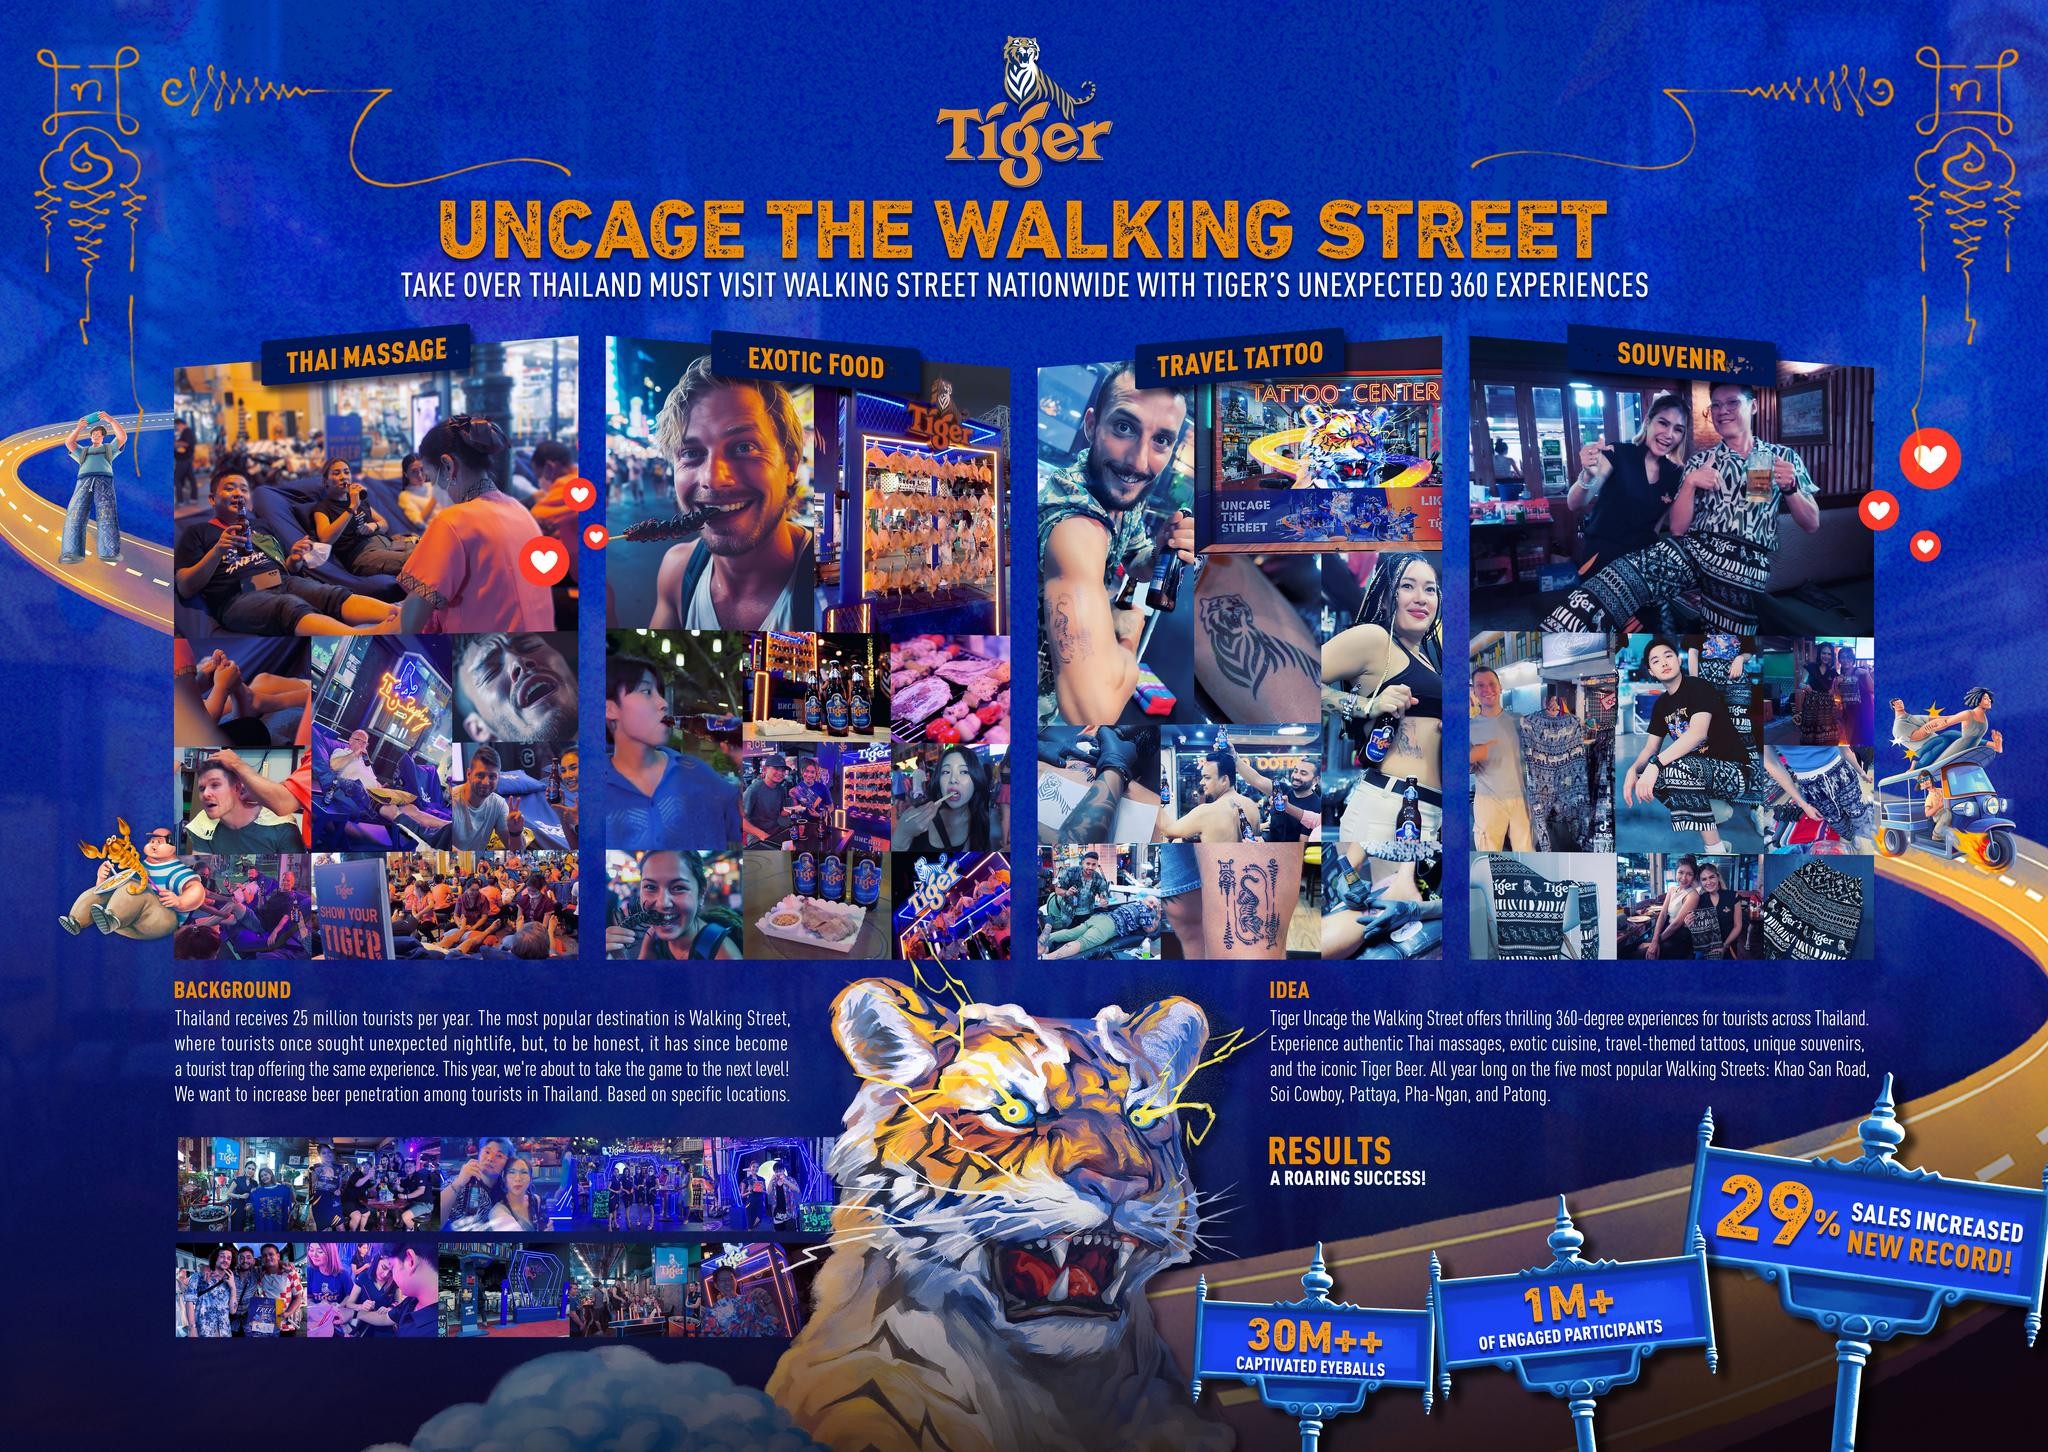 Tiger Uncage the Walking Street